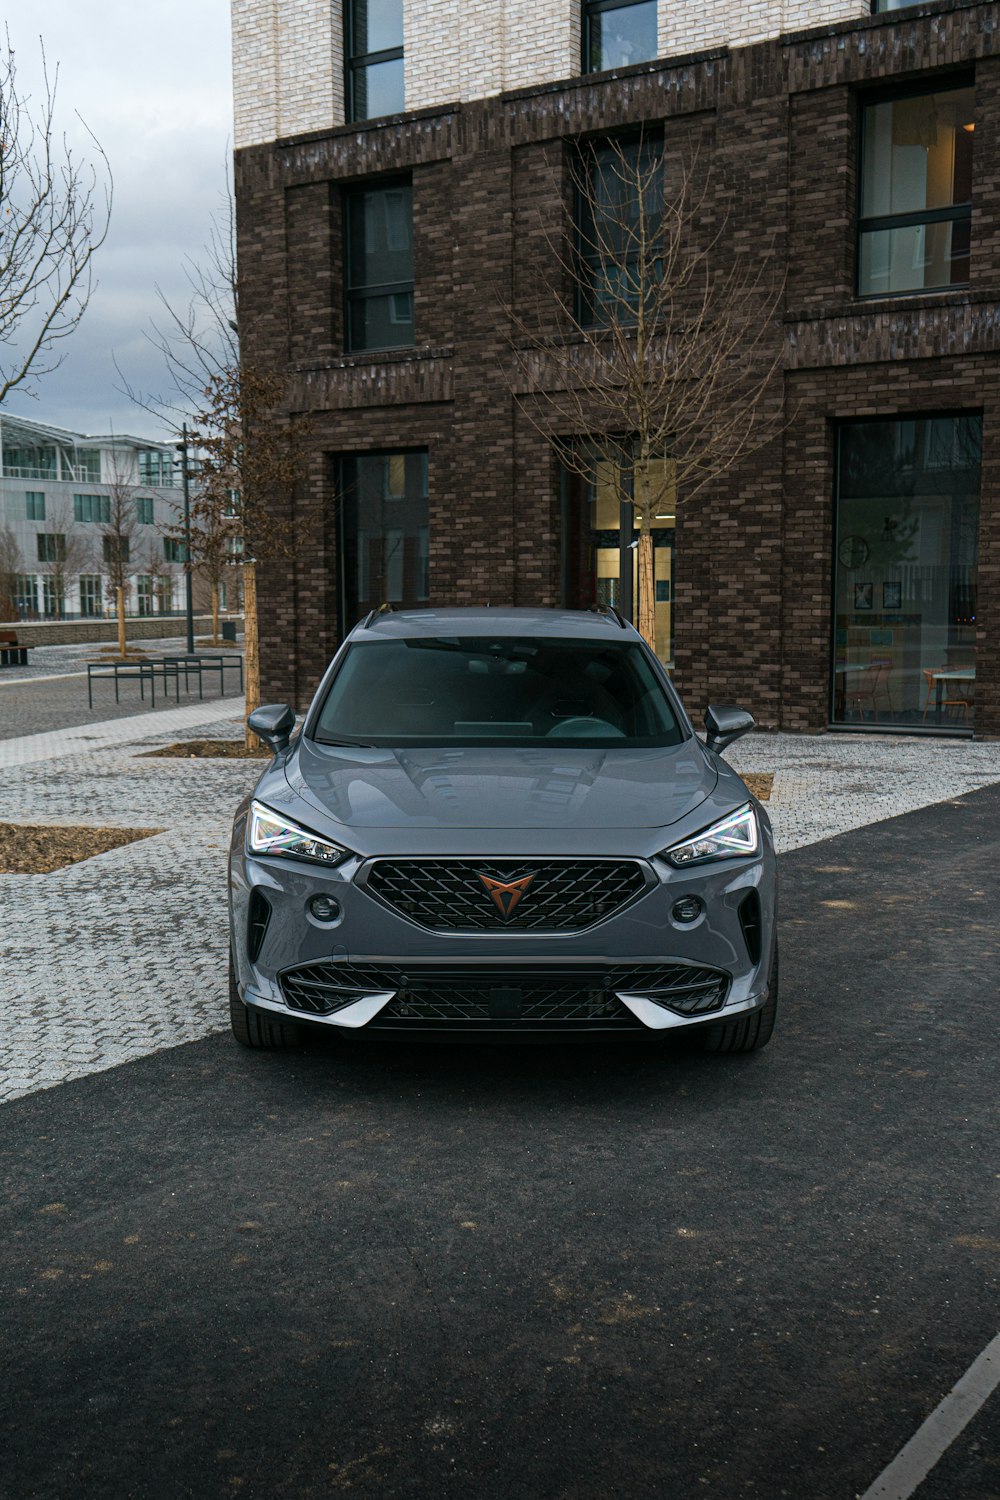 a grey car parked in front of a brick building